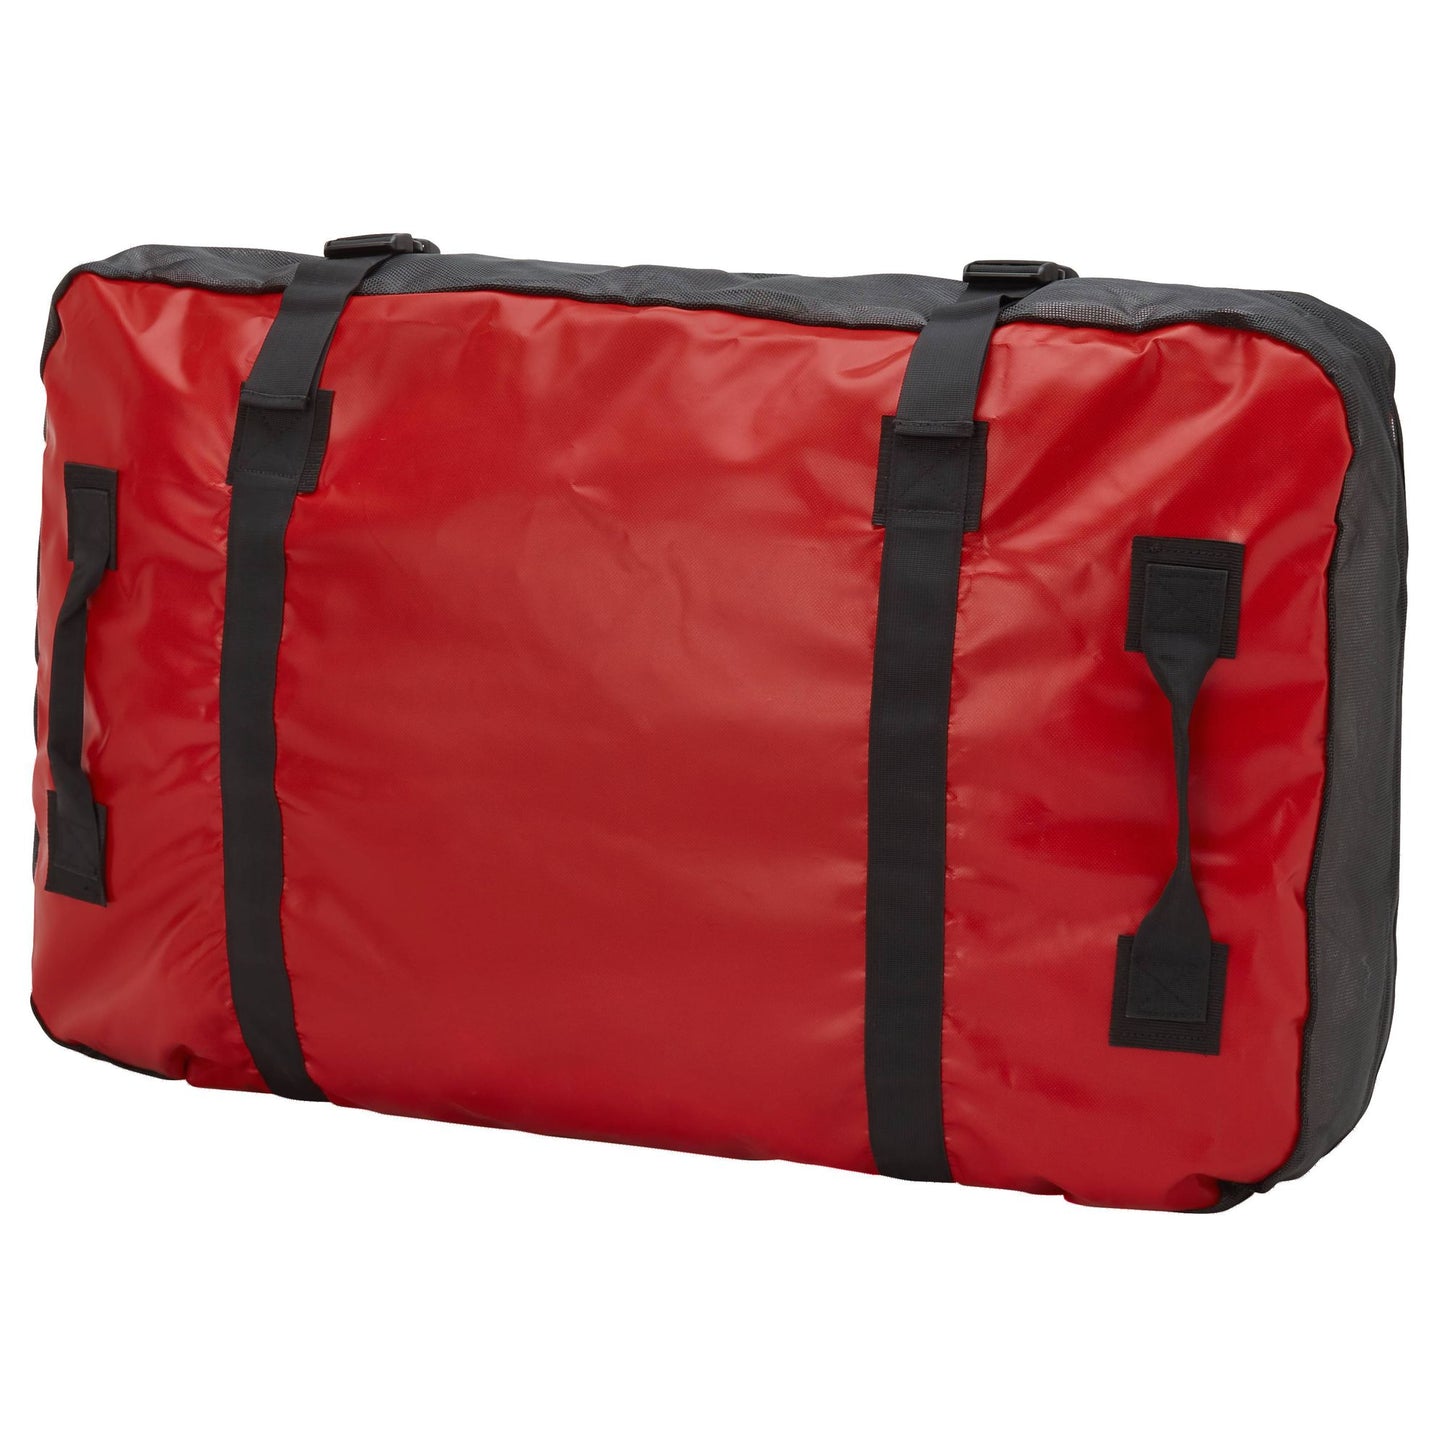 NRS Boat Bag for Rafts, IKs and Cats